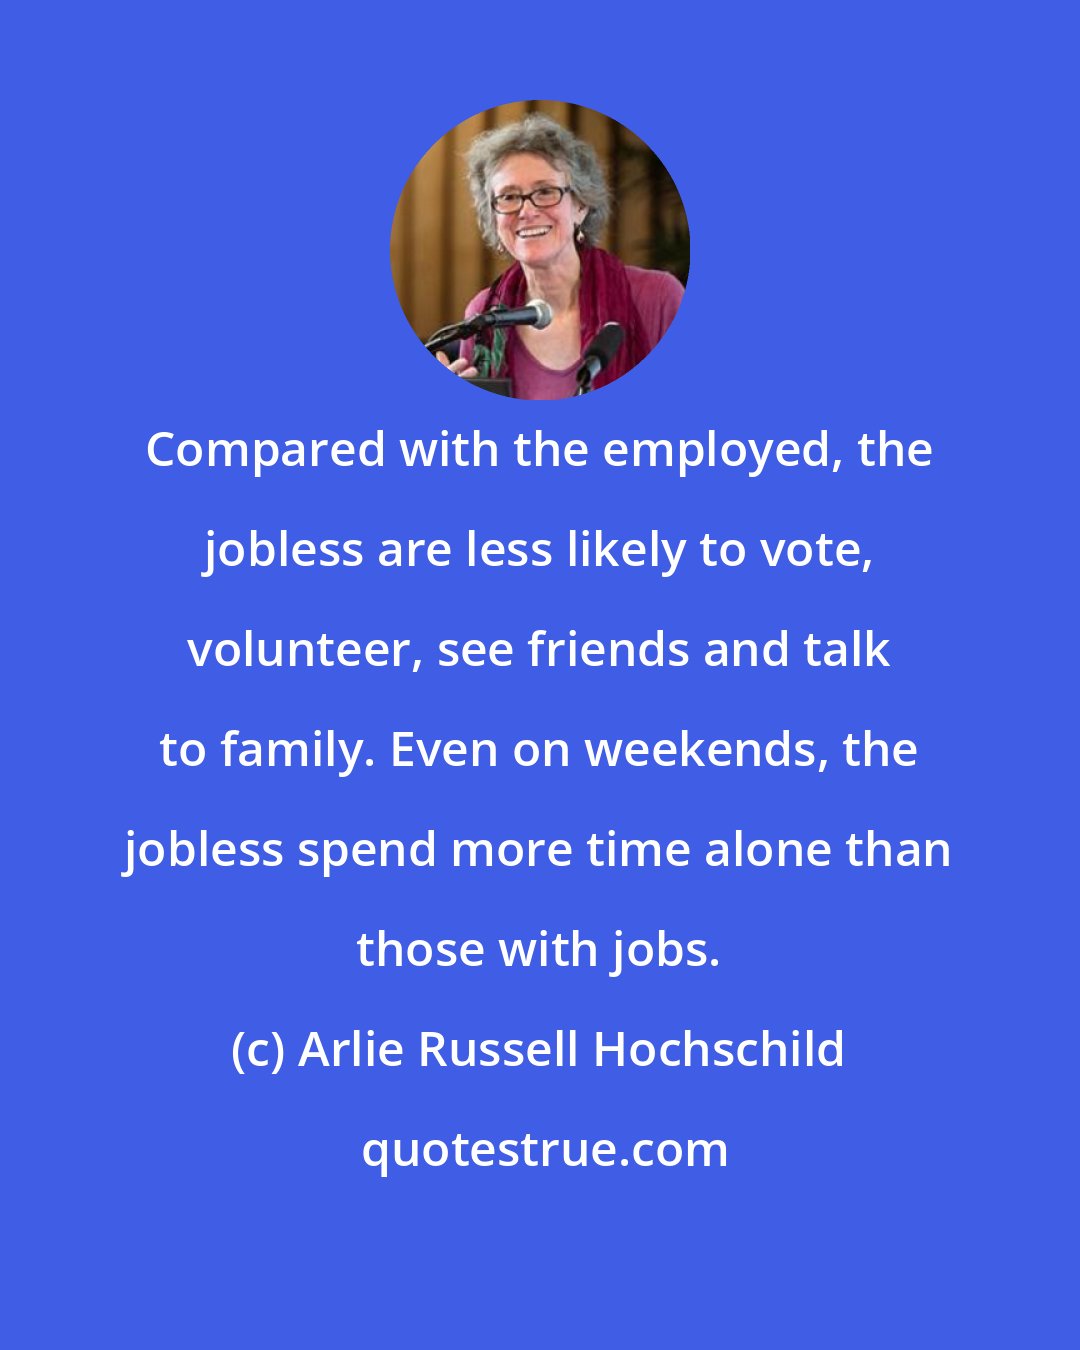 Arlie Russell Hochschild: Compared with the employed, the jobless are less likely to vote, volunteer, see friends and talk to family. Even on weekends, the jobless spend more time alone than those with jobs.